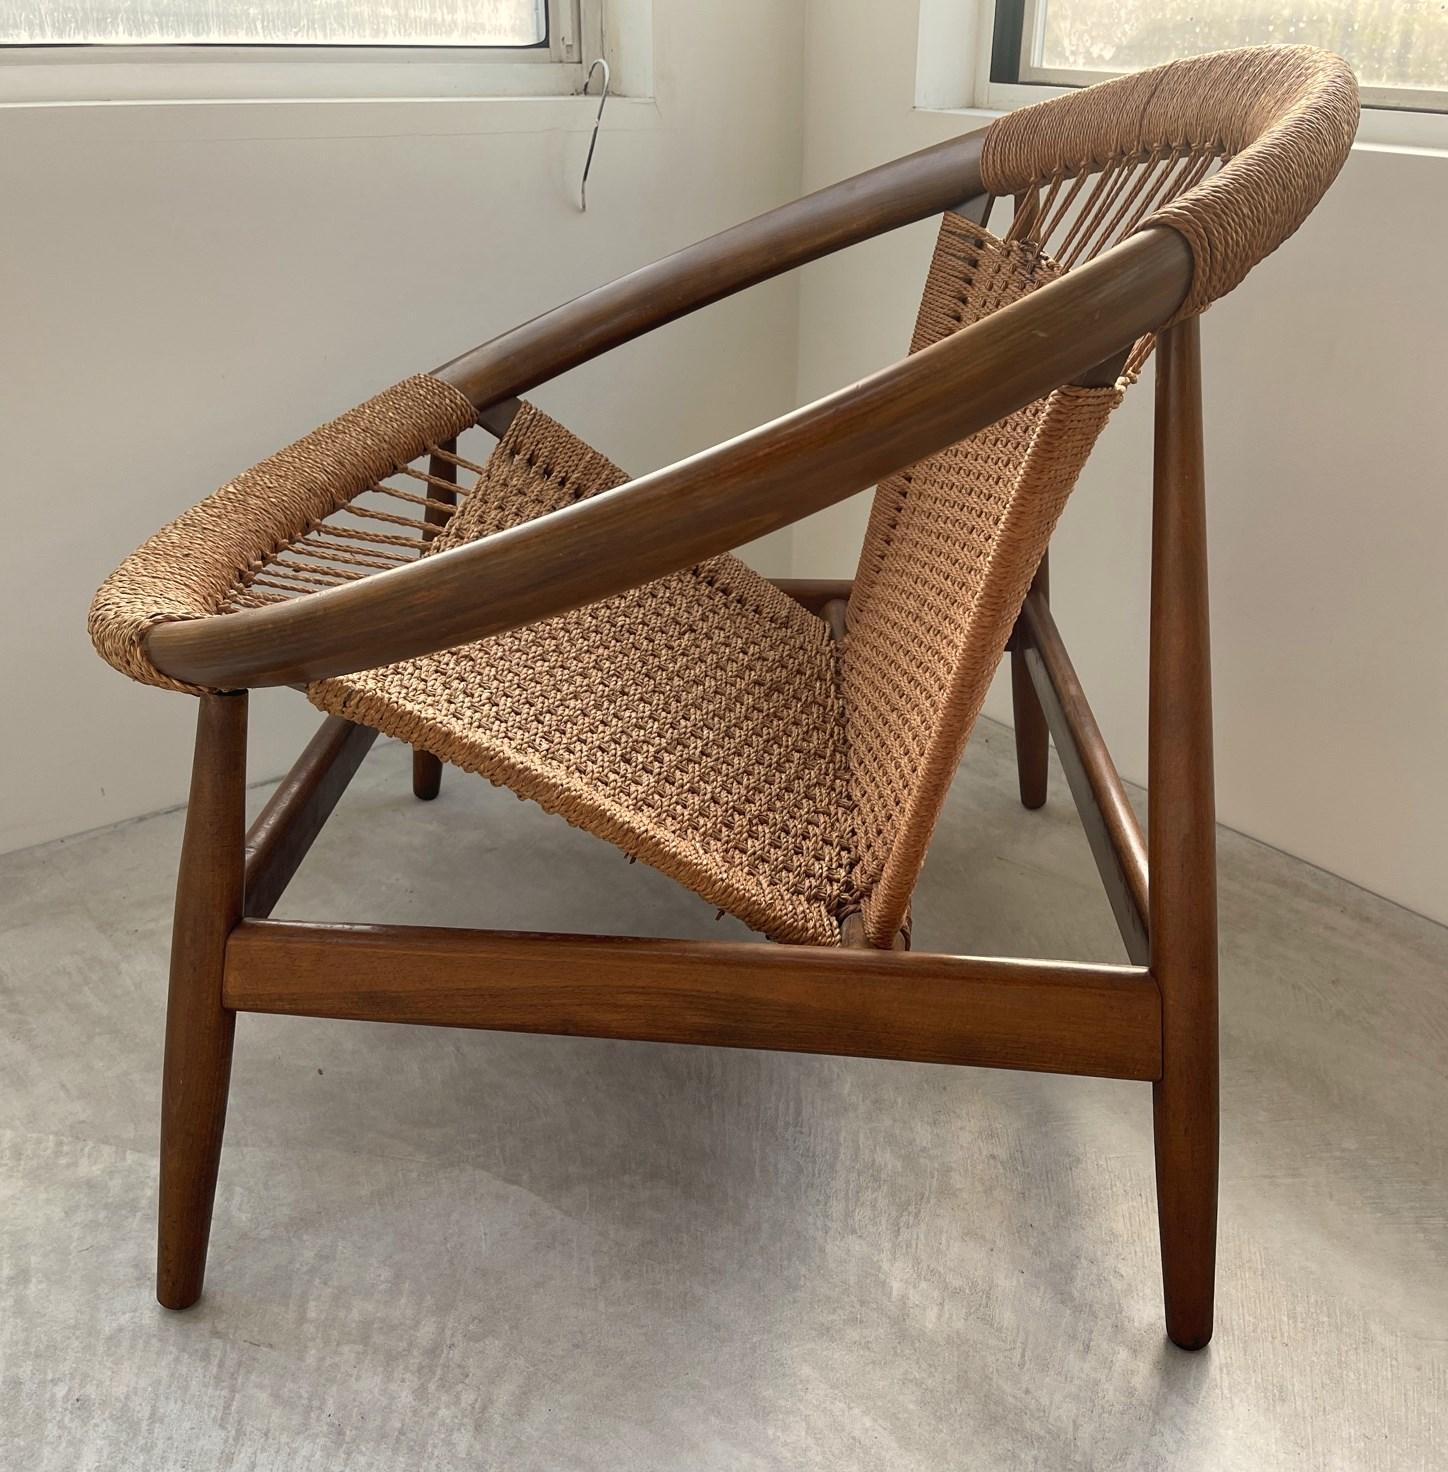 Illum Wikkelsø Ringstol Lounge Chair Mid-Century Modern In Good Condition For Sale In Wallkill, NY